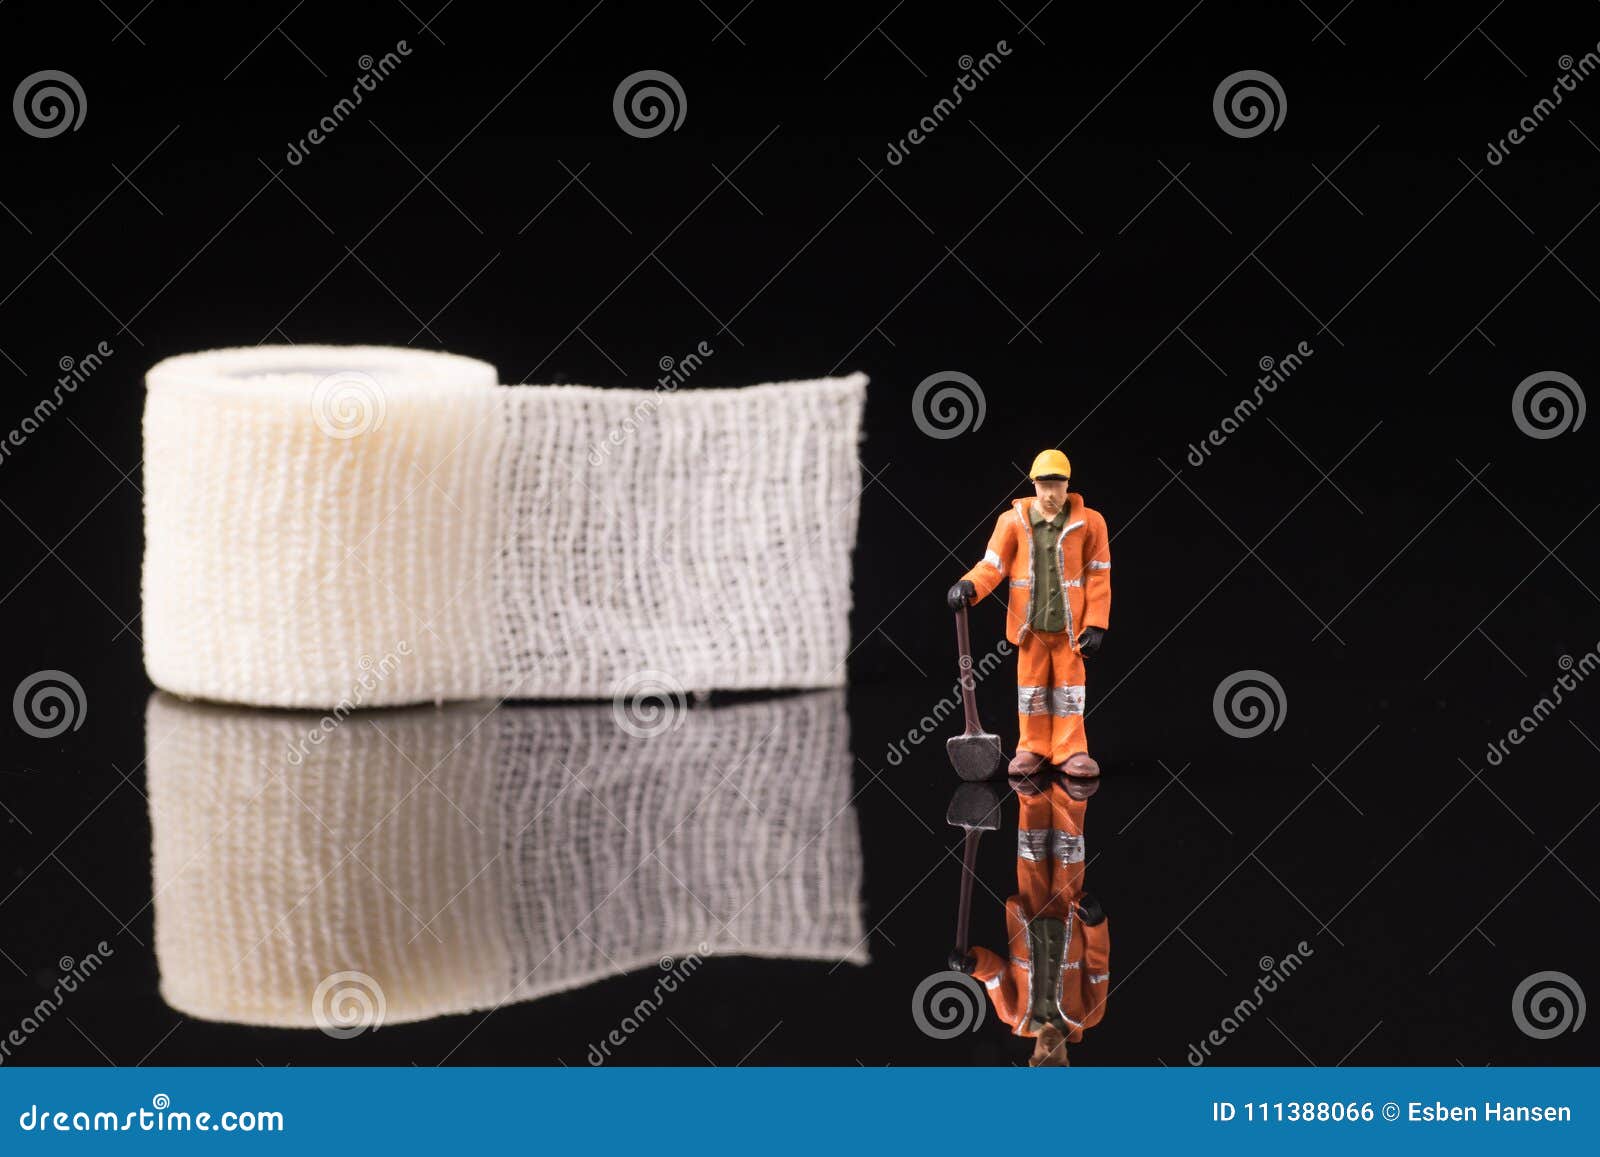 bandage for injuries